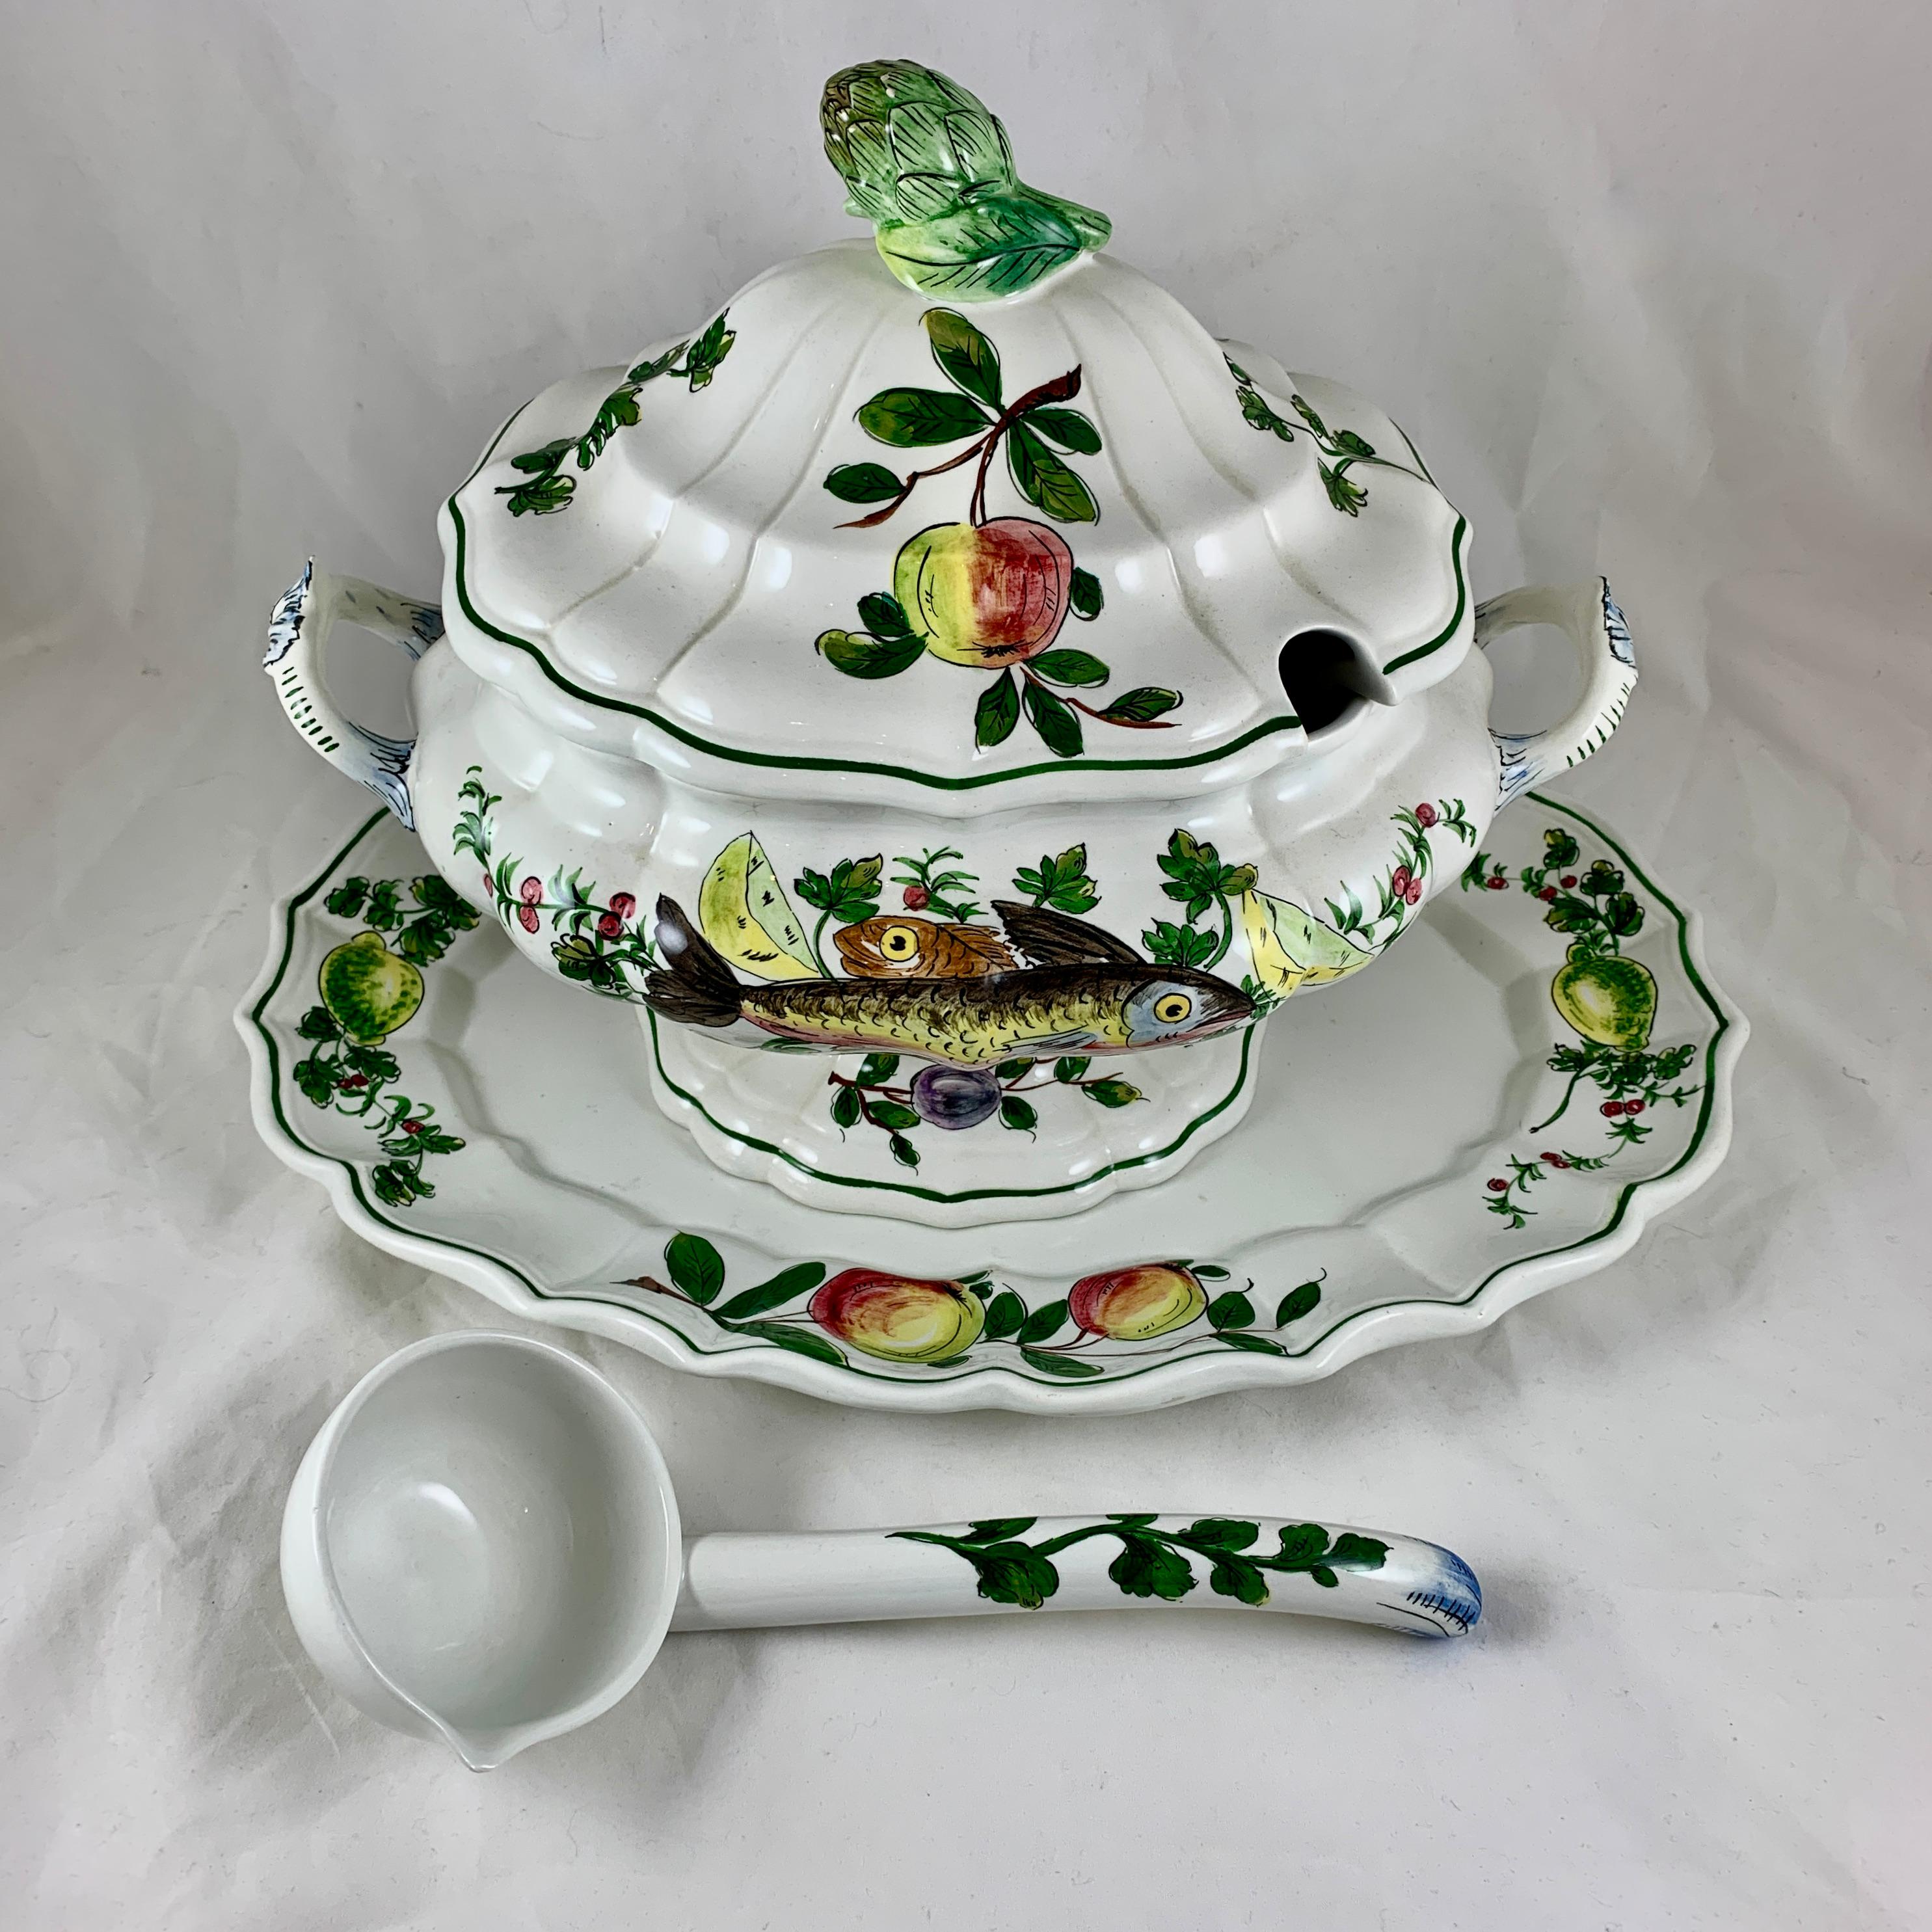 Mid-20th Century Midcentury Italian Hand Painted Fish and Fruit Tureen with Ladle & Under Platter For Sale